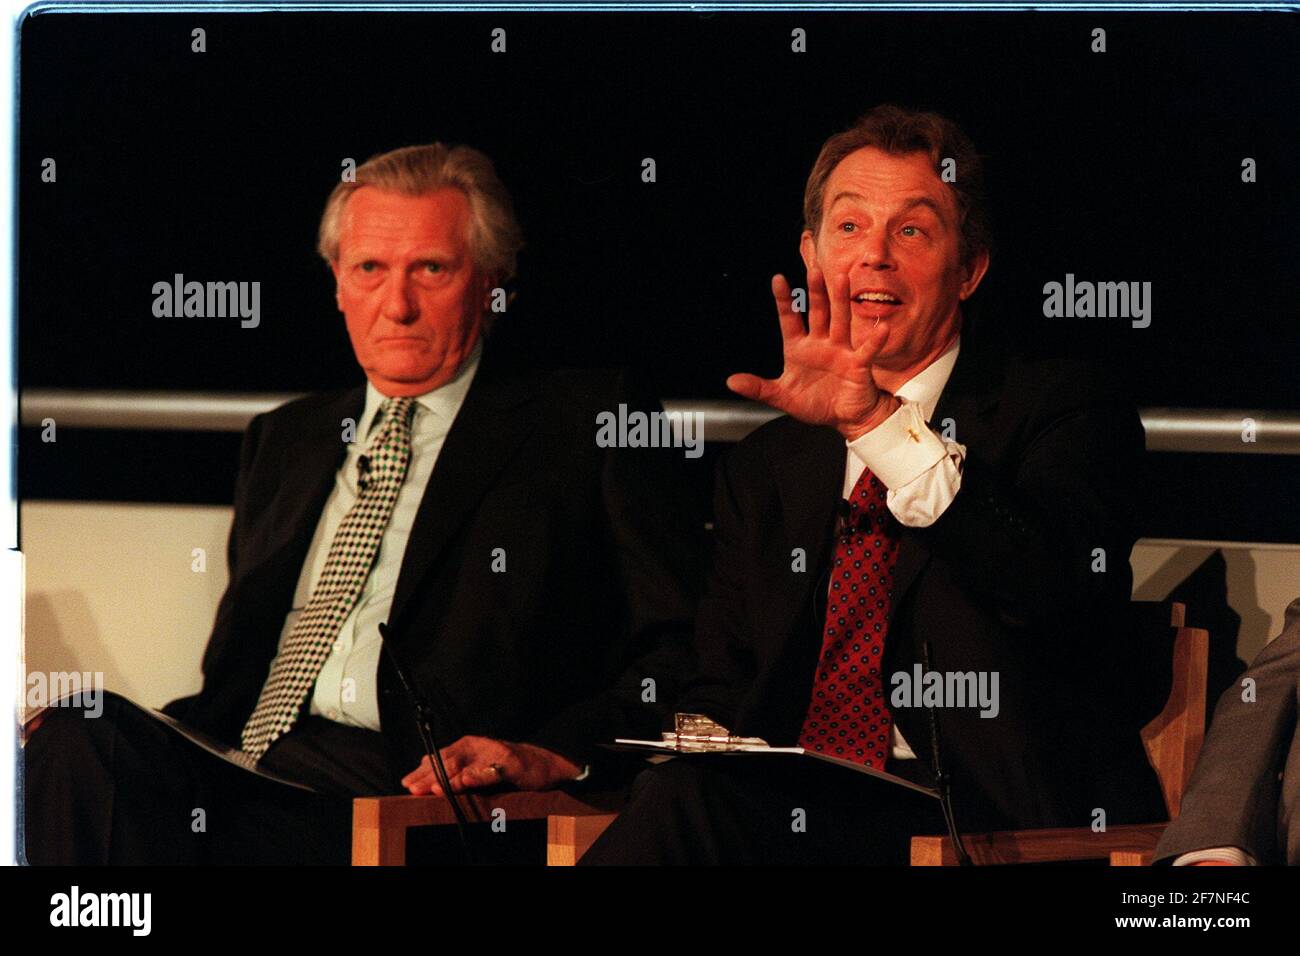 MICHAEL HESELTINE, PRIME MINISTER TONY BLAIR ON THE SAME PLATFORM TALKING  ABOUT BRITAINS ROLE IN EUROPE Stock Photo - Alamy